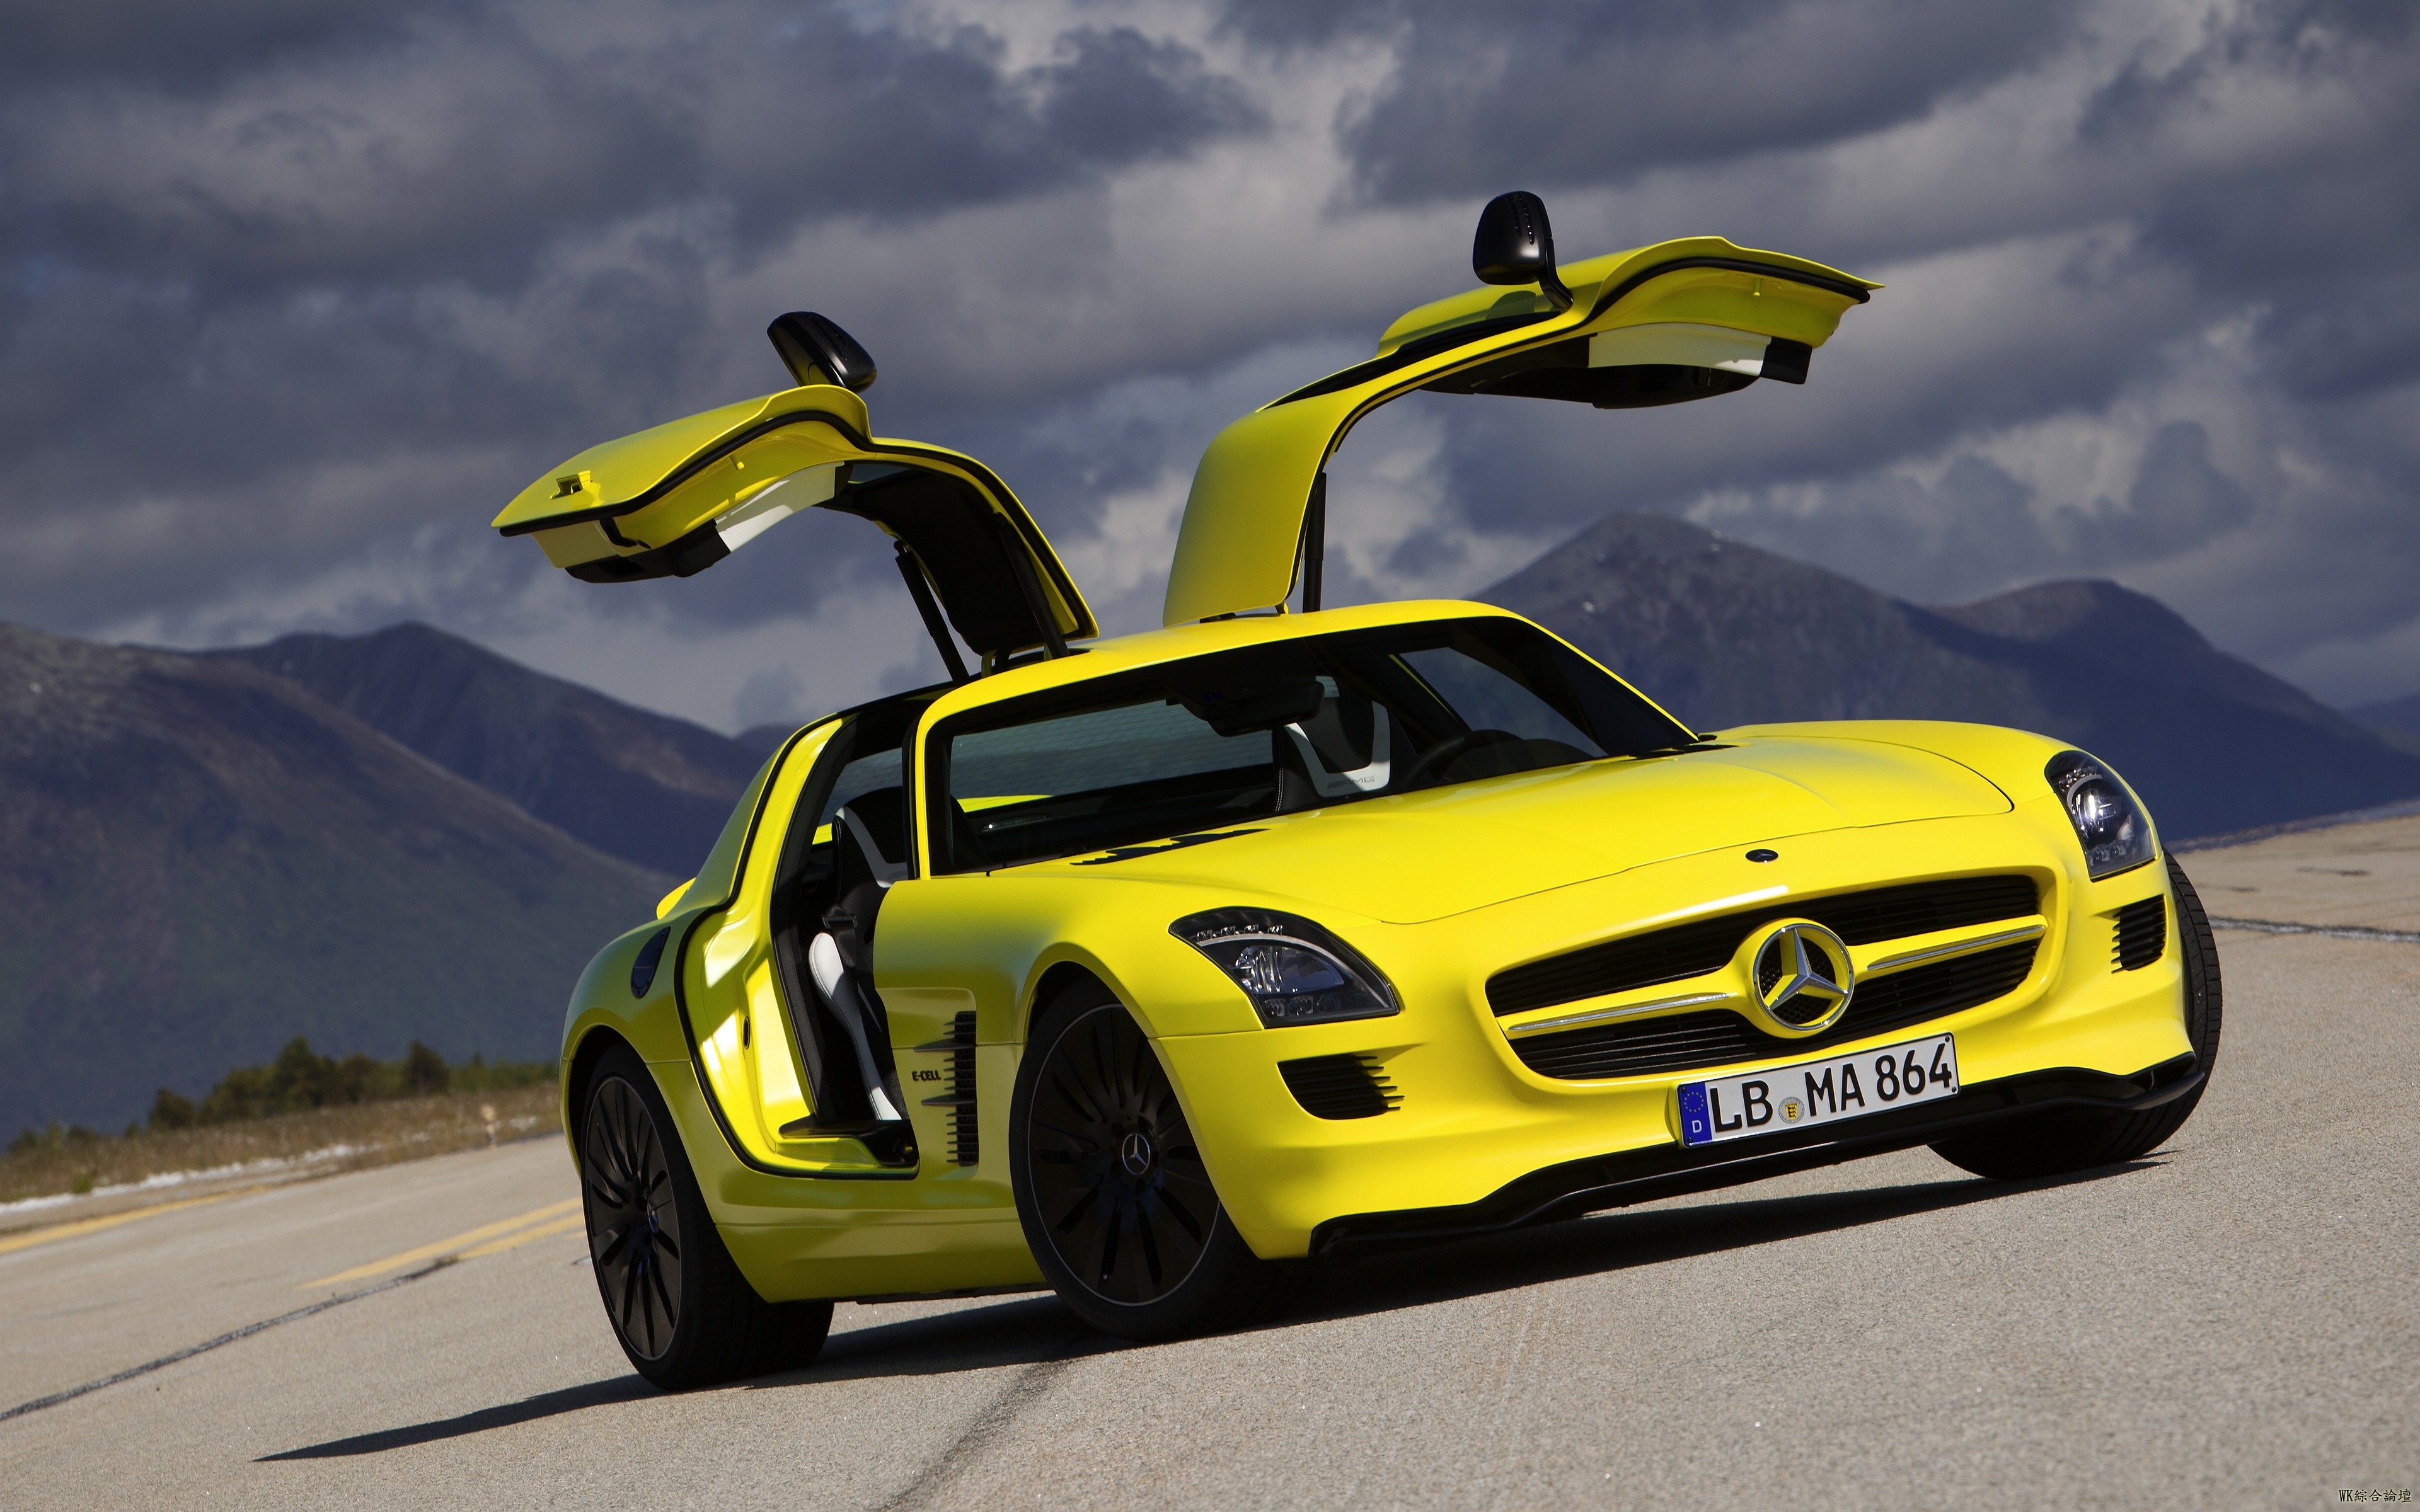 mercedes_benz_yellow_sls_amg_e_cell_coupe_97453_3840x2400.jpg